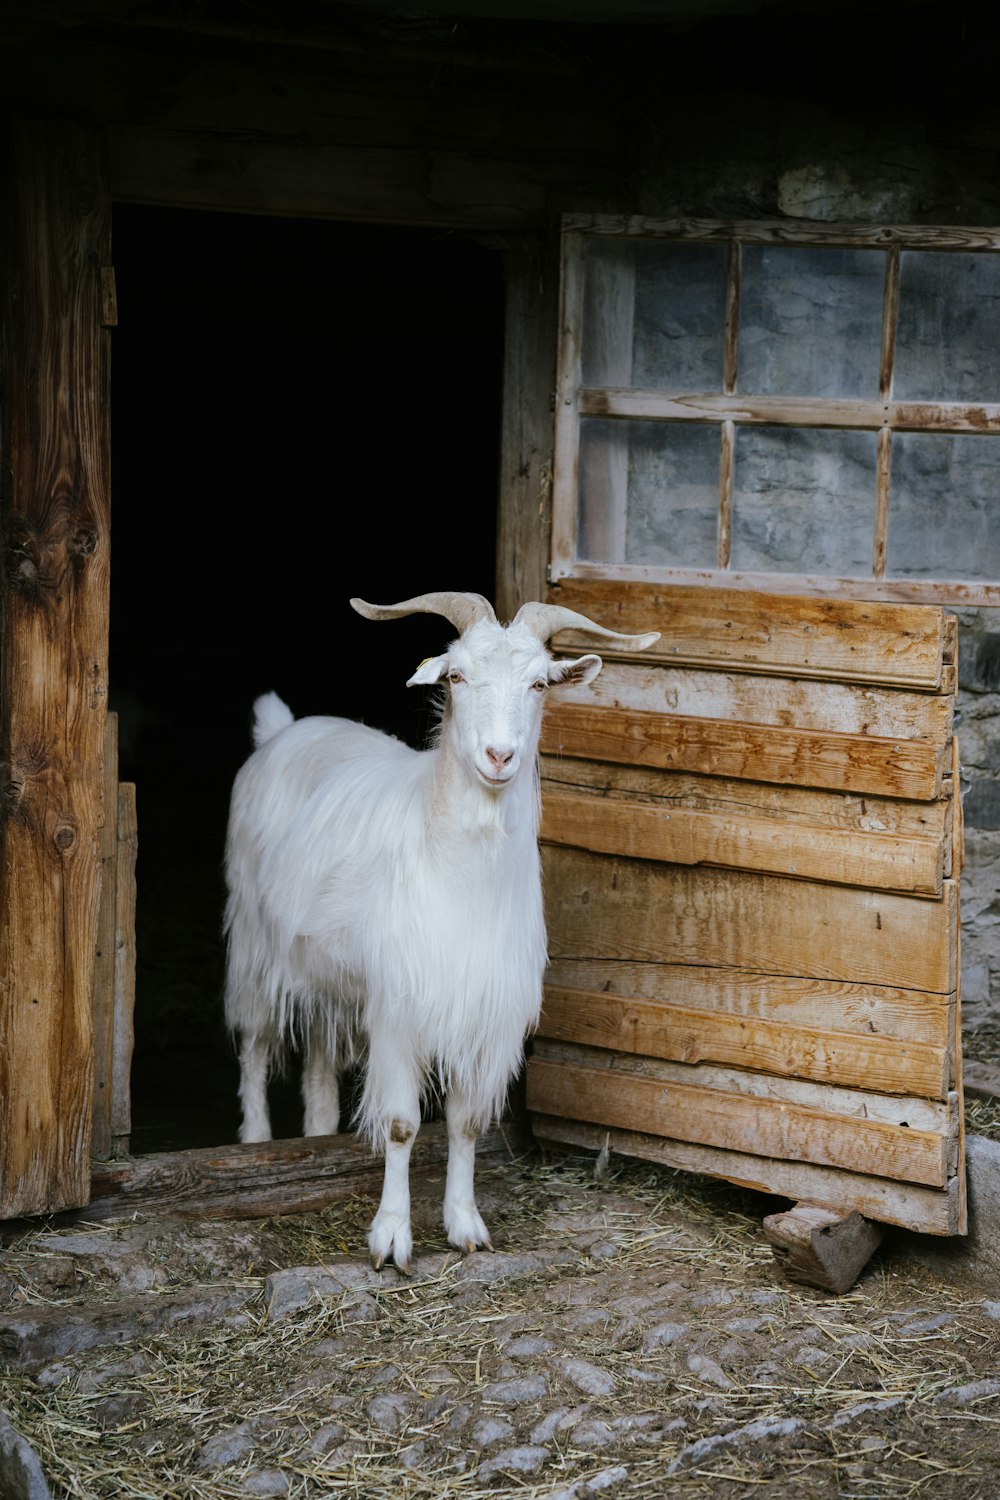 a goat standing in the doorway of a building